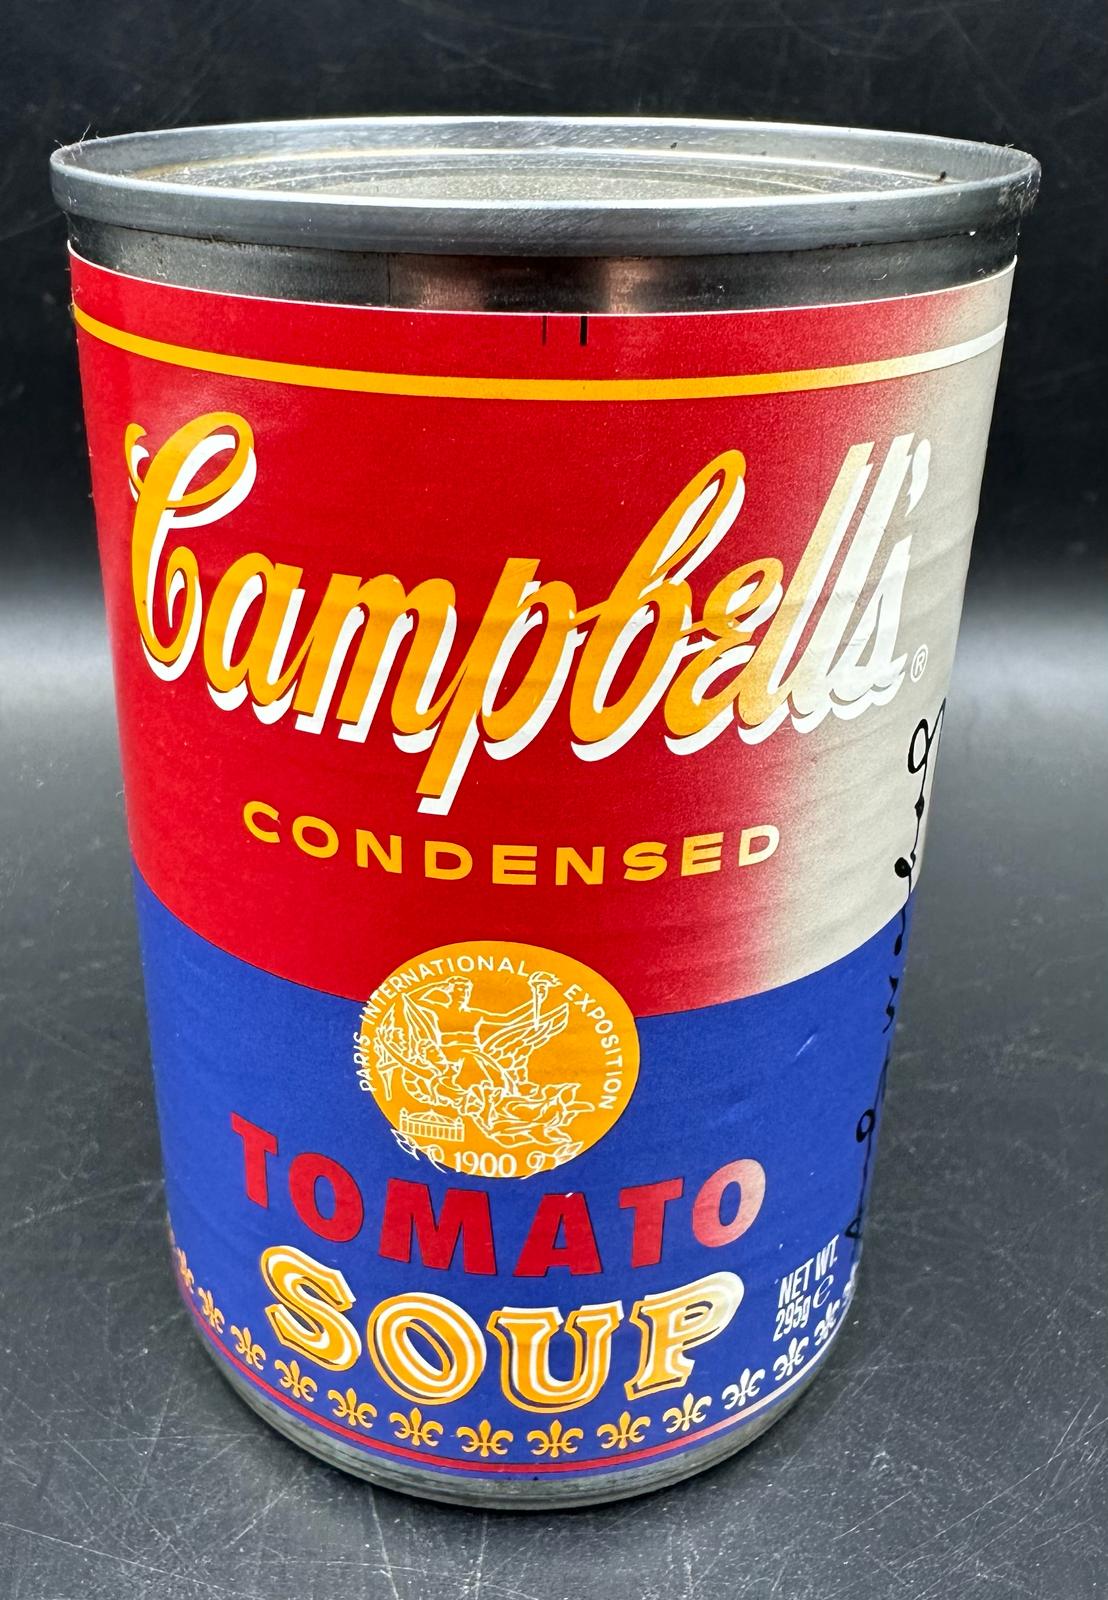 A set of four Andy Warhol Foundation Campbells tomato soup cans, limited edition and a framed - Image 6 of 6